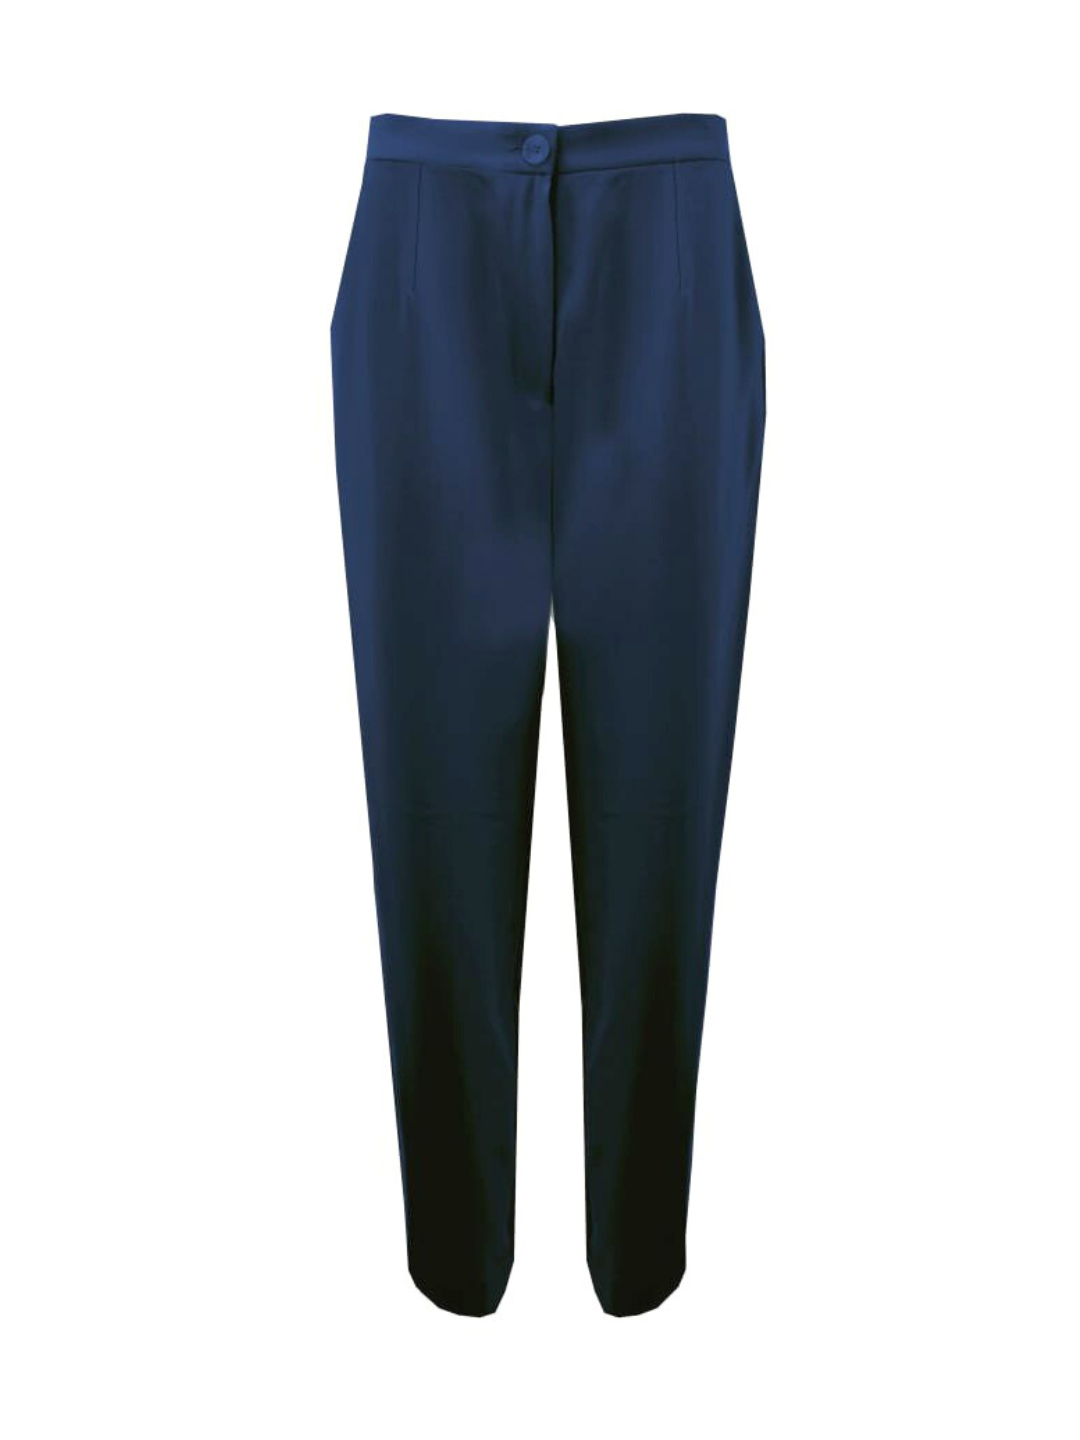 NO.3 Tailored Trousers (French Navy)